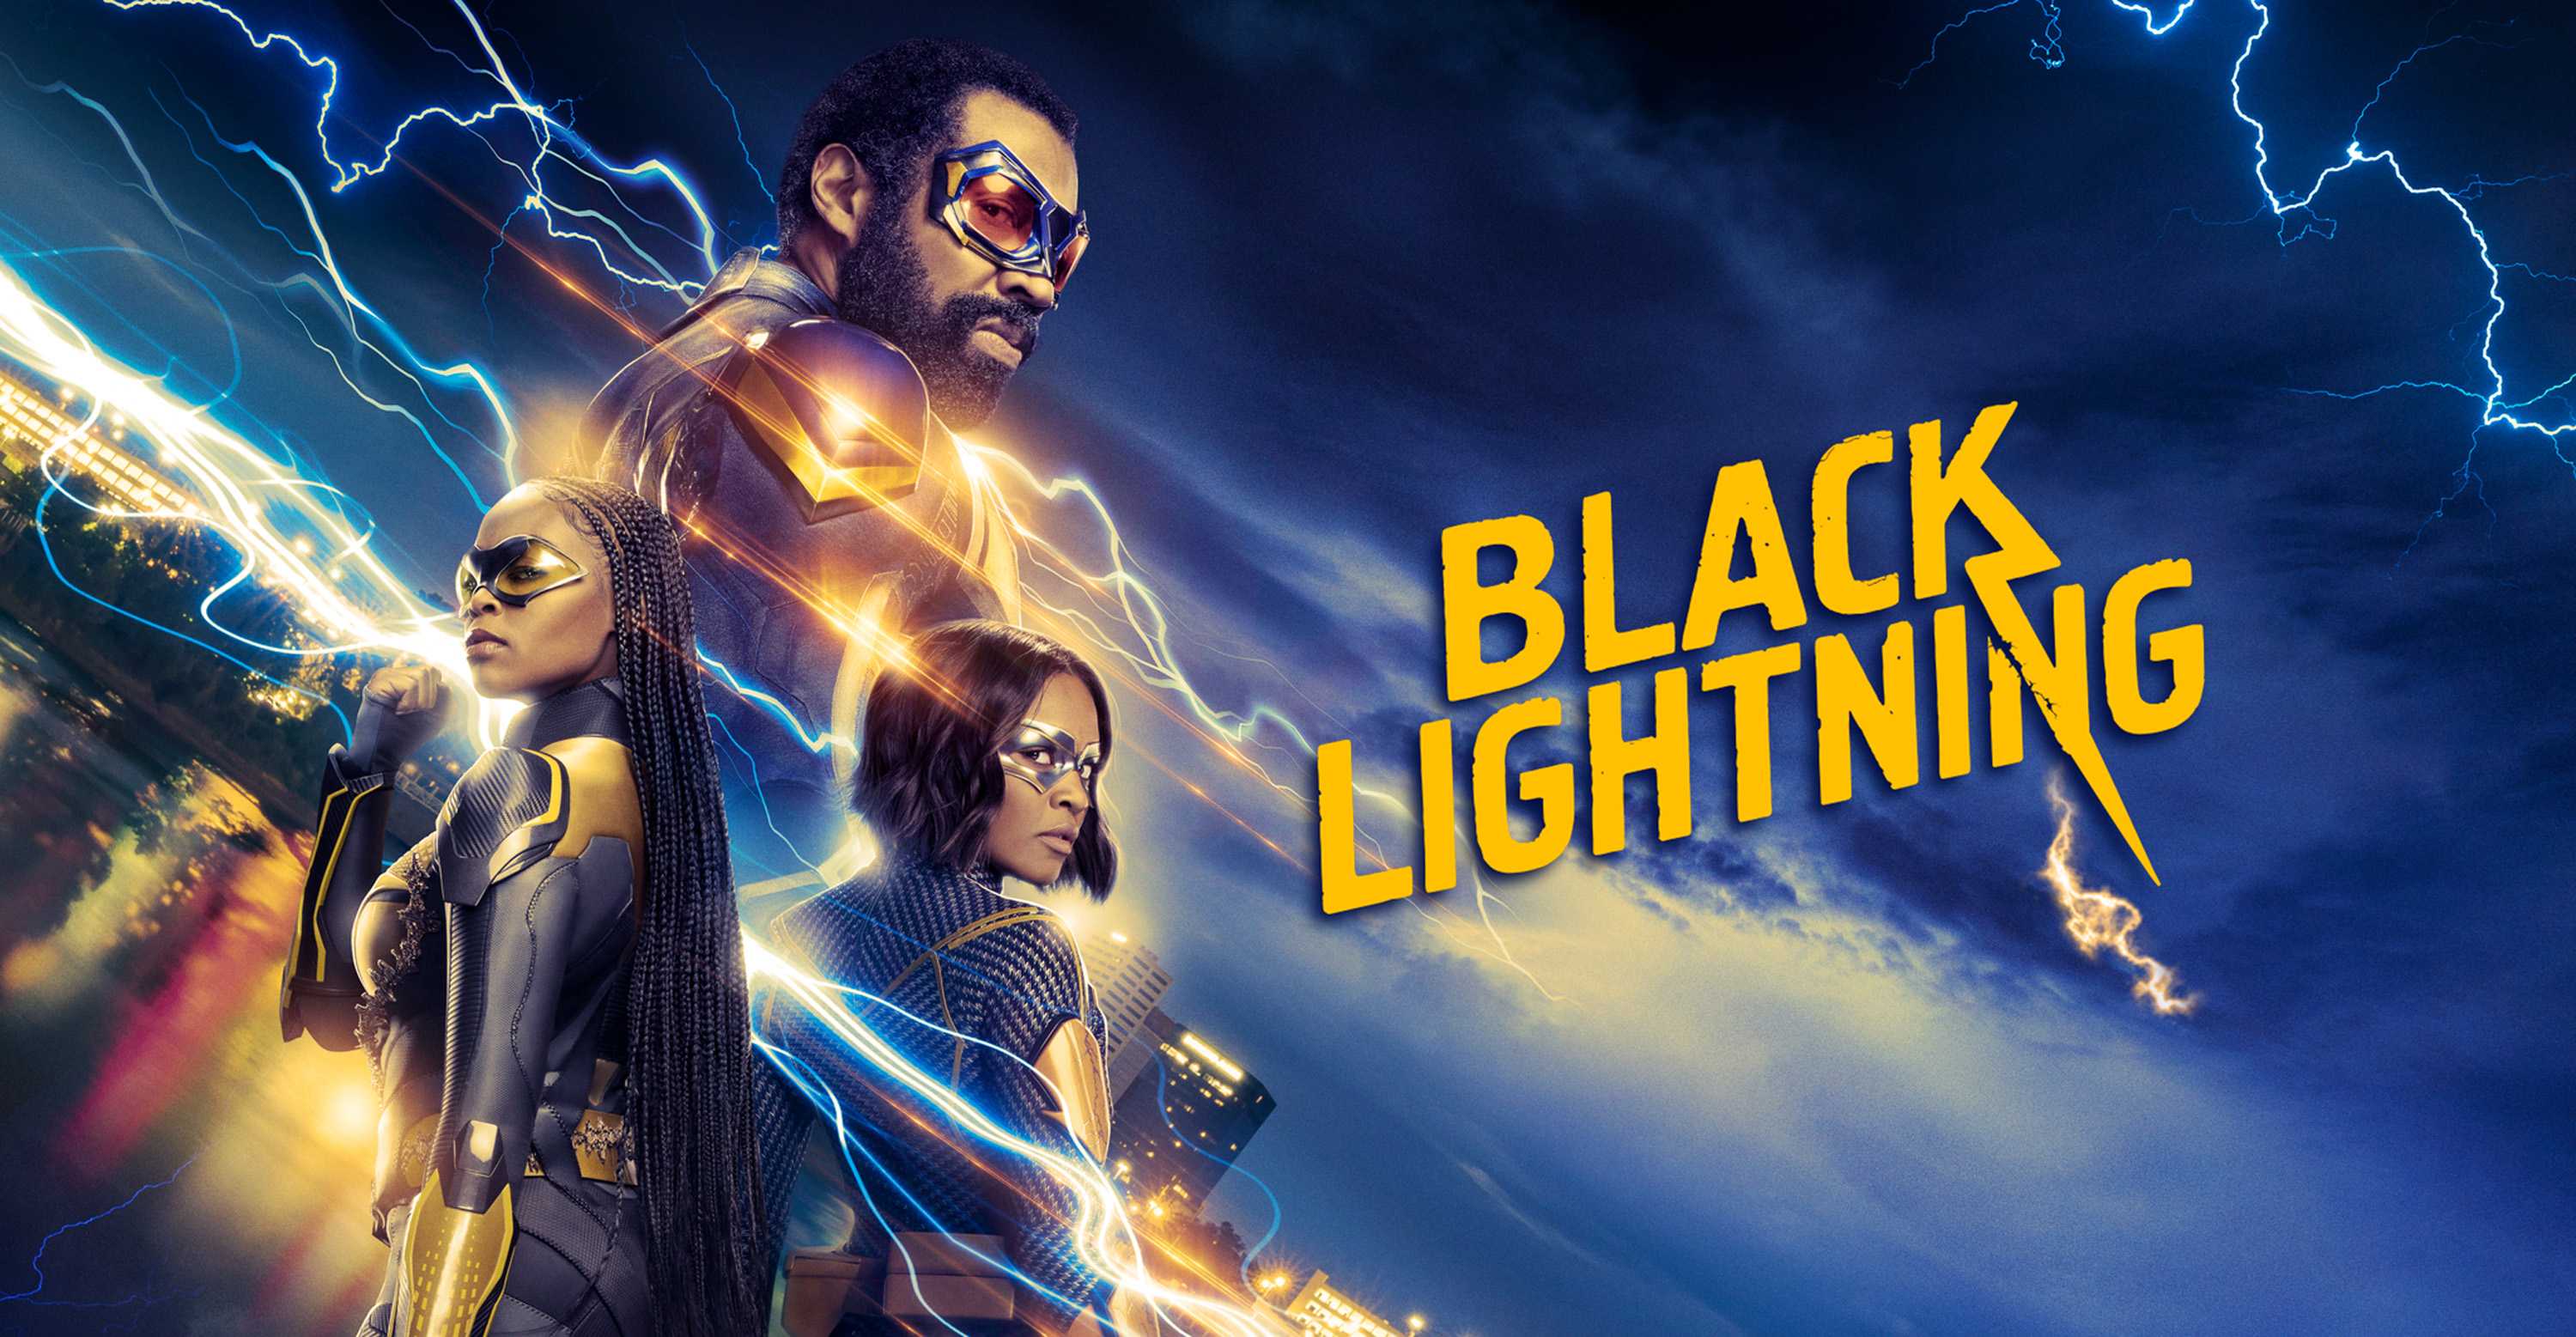 A TV poster for the series Black Lightning with three characters dressed in superhero suits overlay against a dark blue sky.